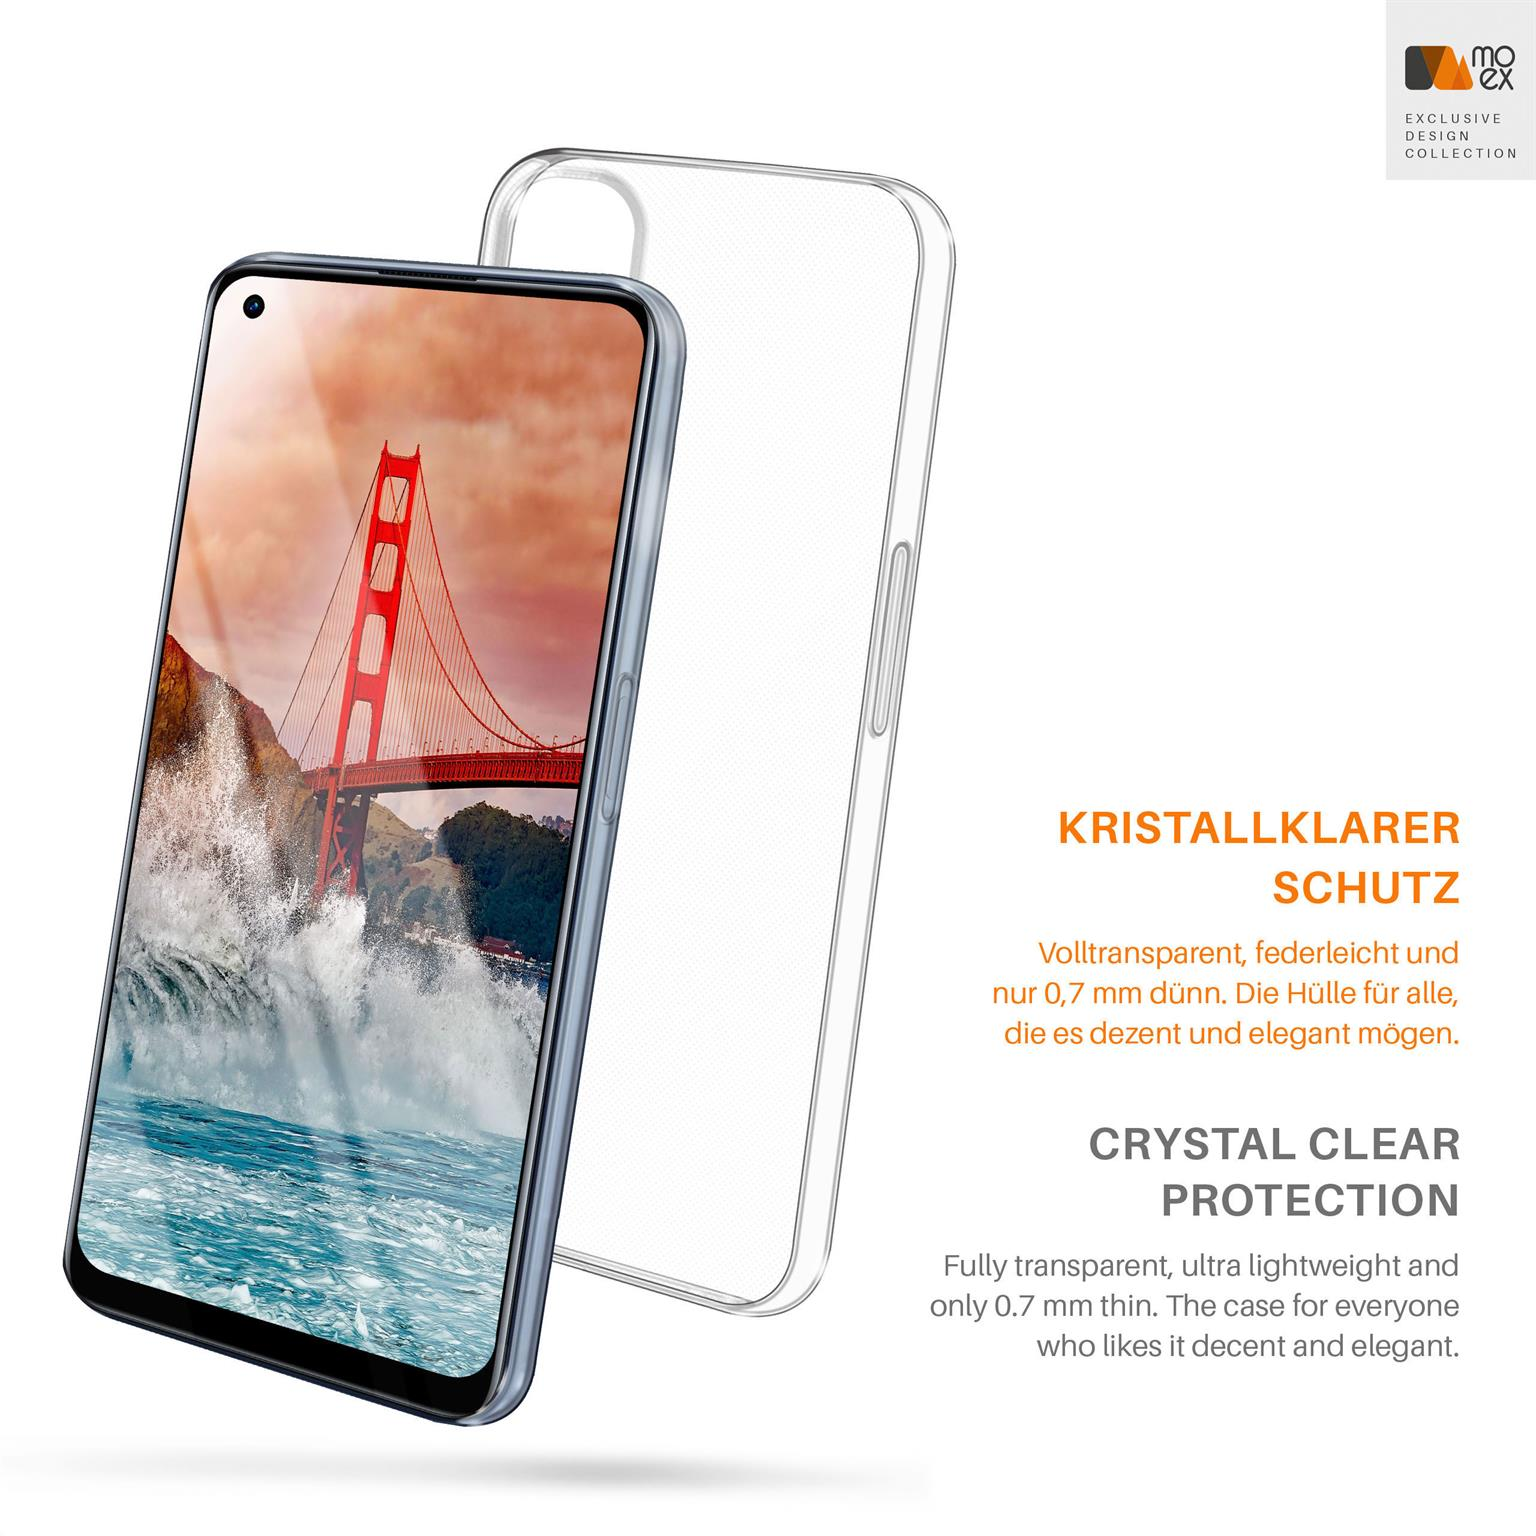 MOEX 7, Case, Aero Crystal-Clear Realme, Backcover,